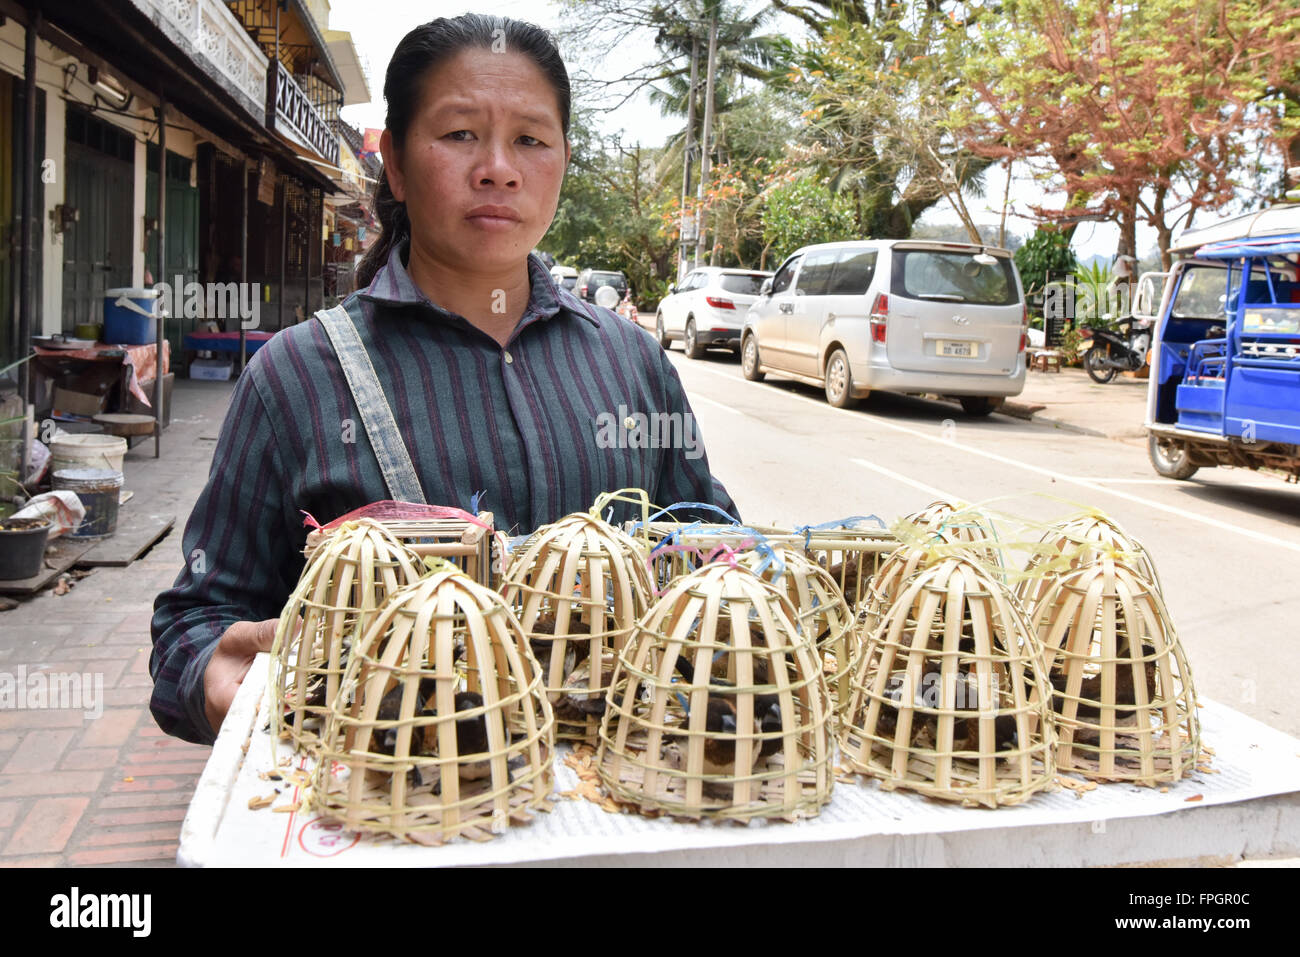 Women selling birds in small cages Luang Prabang Laos Stock Photo